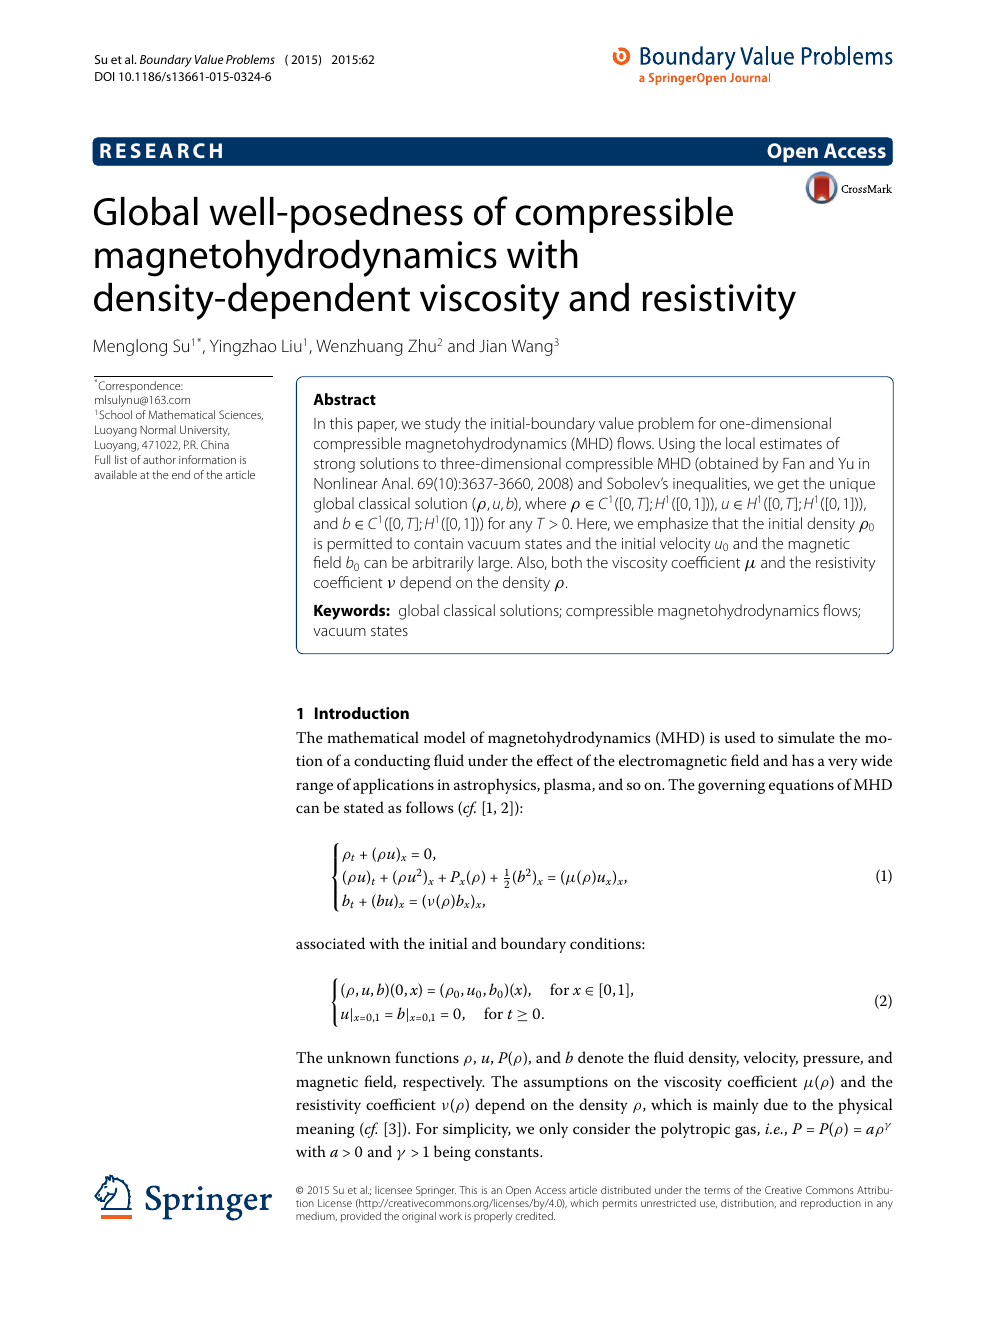 Global Well Posedness Of Compressible Magnetohydrodynamics With Density Dependent Viscosity And Resistivity Topic Of Research Paper In Mathematics Download Scholarly Article Pdf And Read For Free On Cyberleninka Open Science Hub